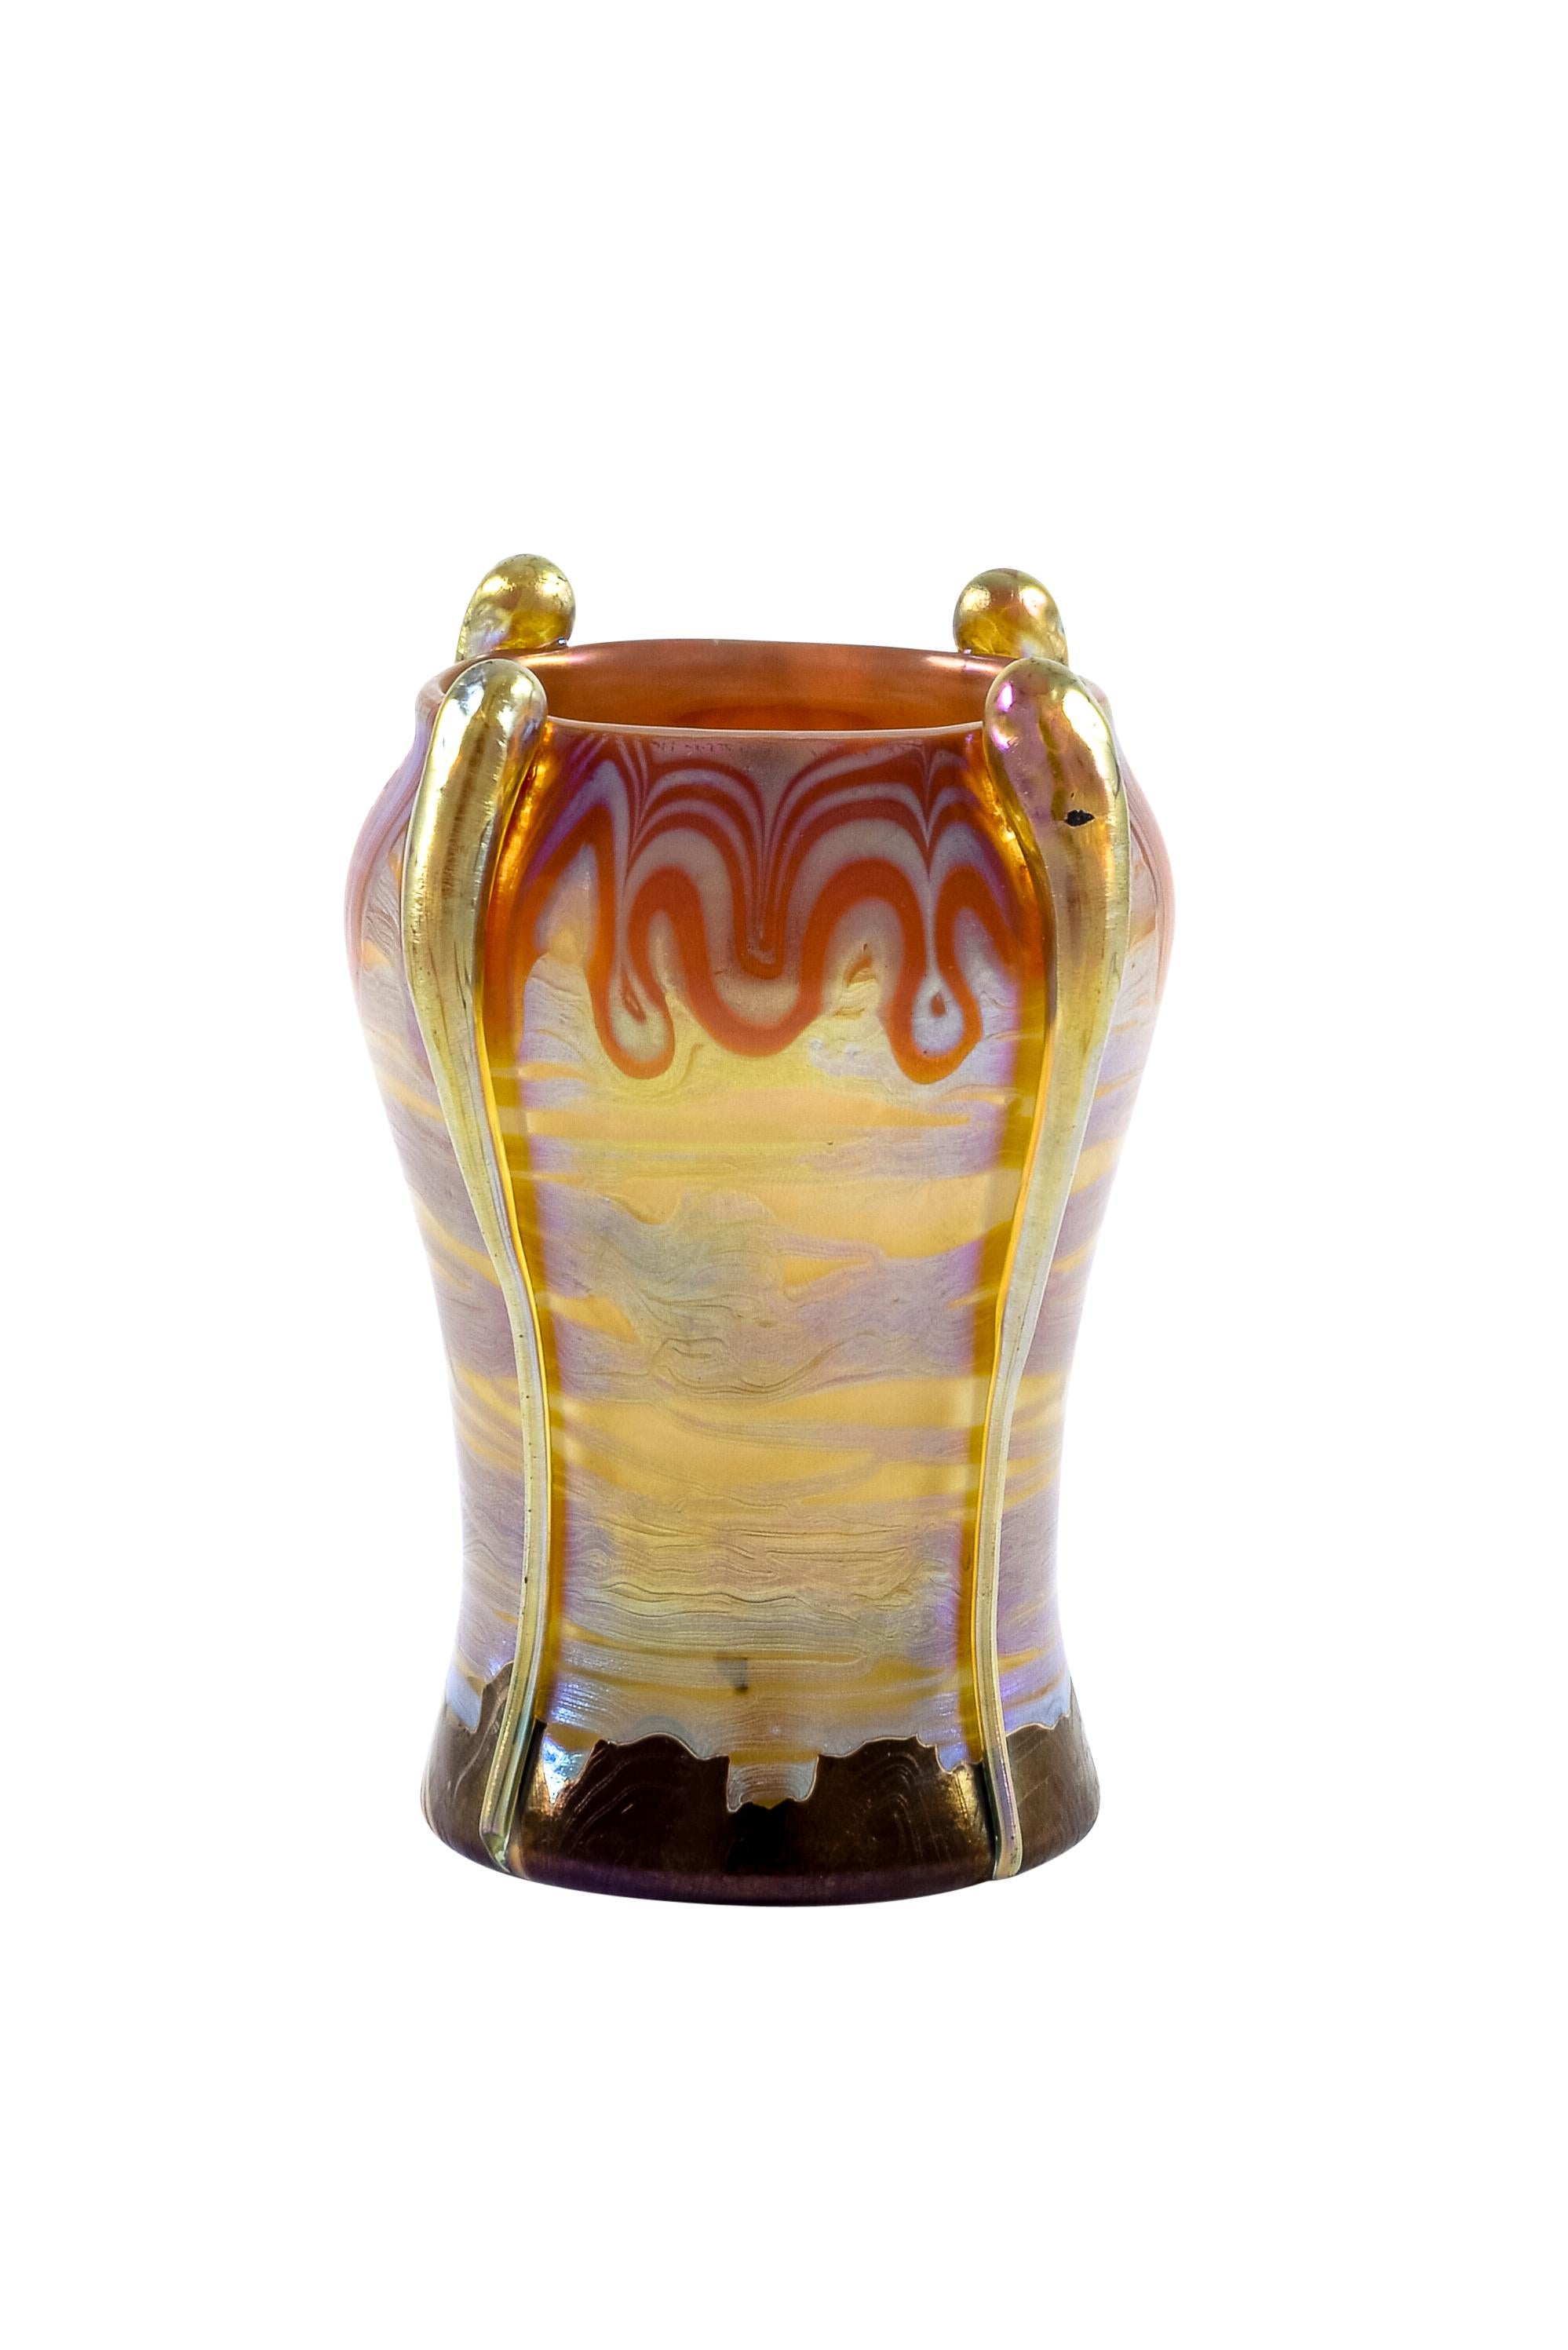 Austrian Jugendstil Loetz Art glass vase orange circa 1901 Koloman Moser School Decor Franz Hofstotter

The form design for this vase can be attributed to Robert Holubetz. Between 1898 and 1902 he studied at the Vienna School of Arts and Crafts